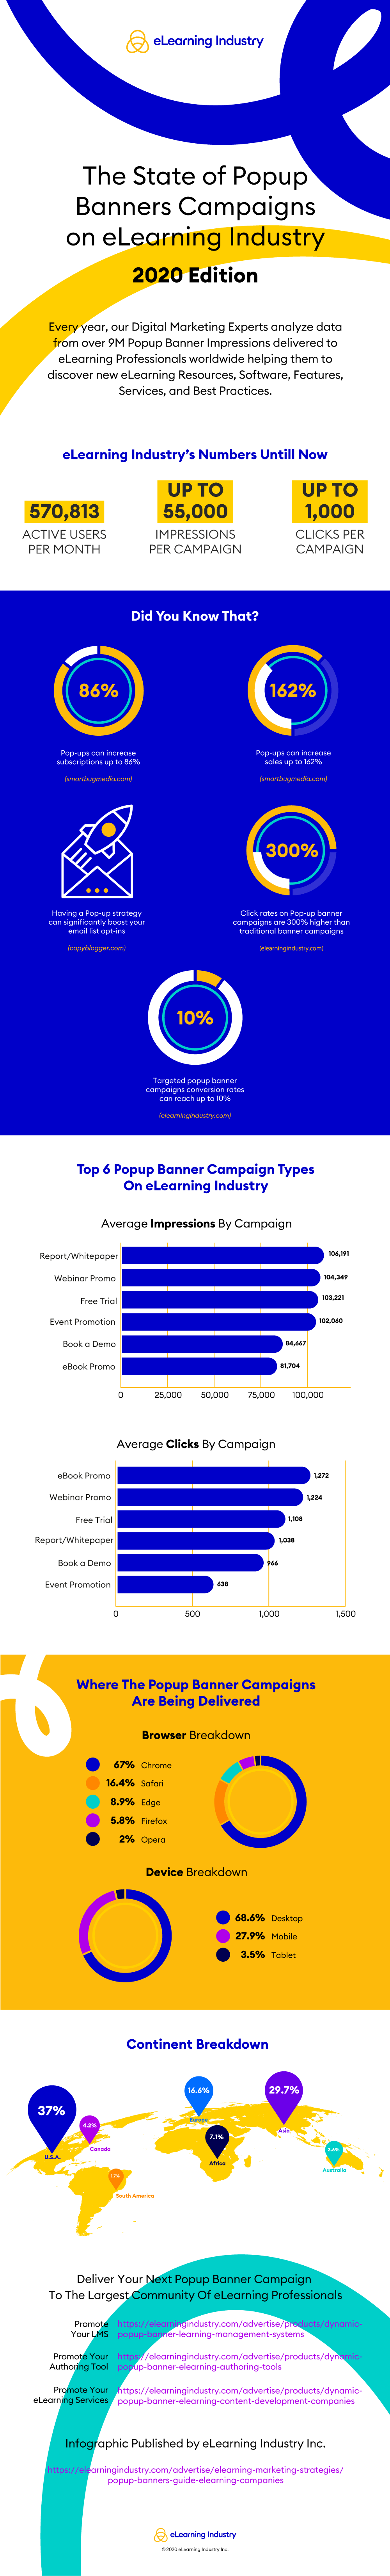 Popup-Banner Campaigns infographic